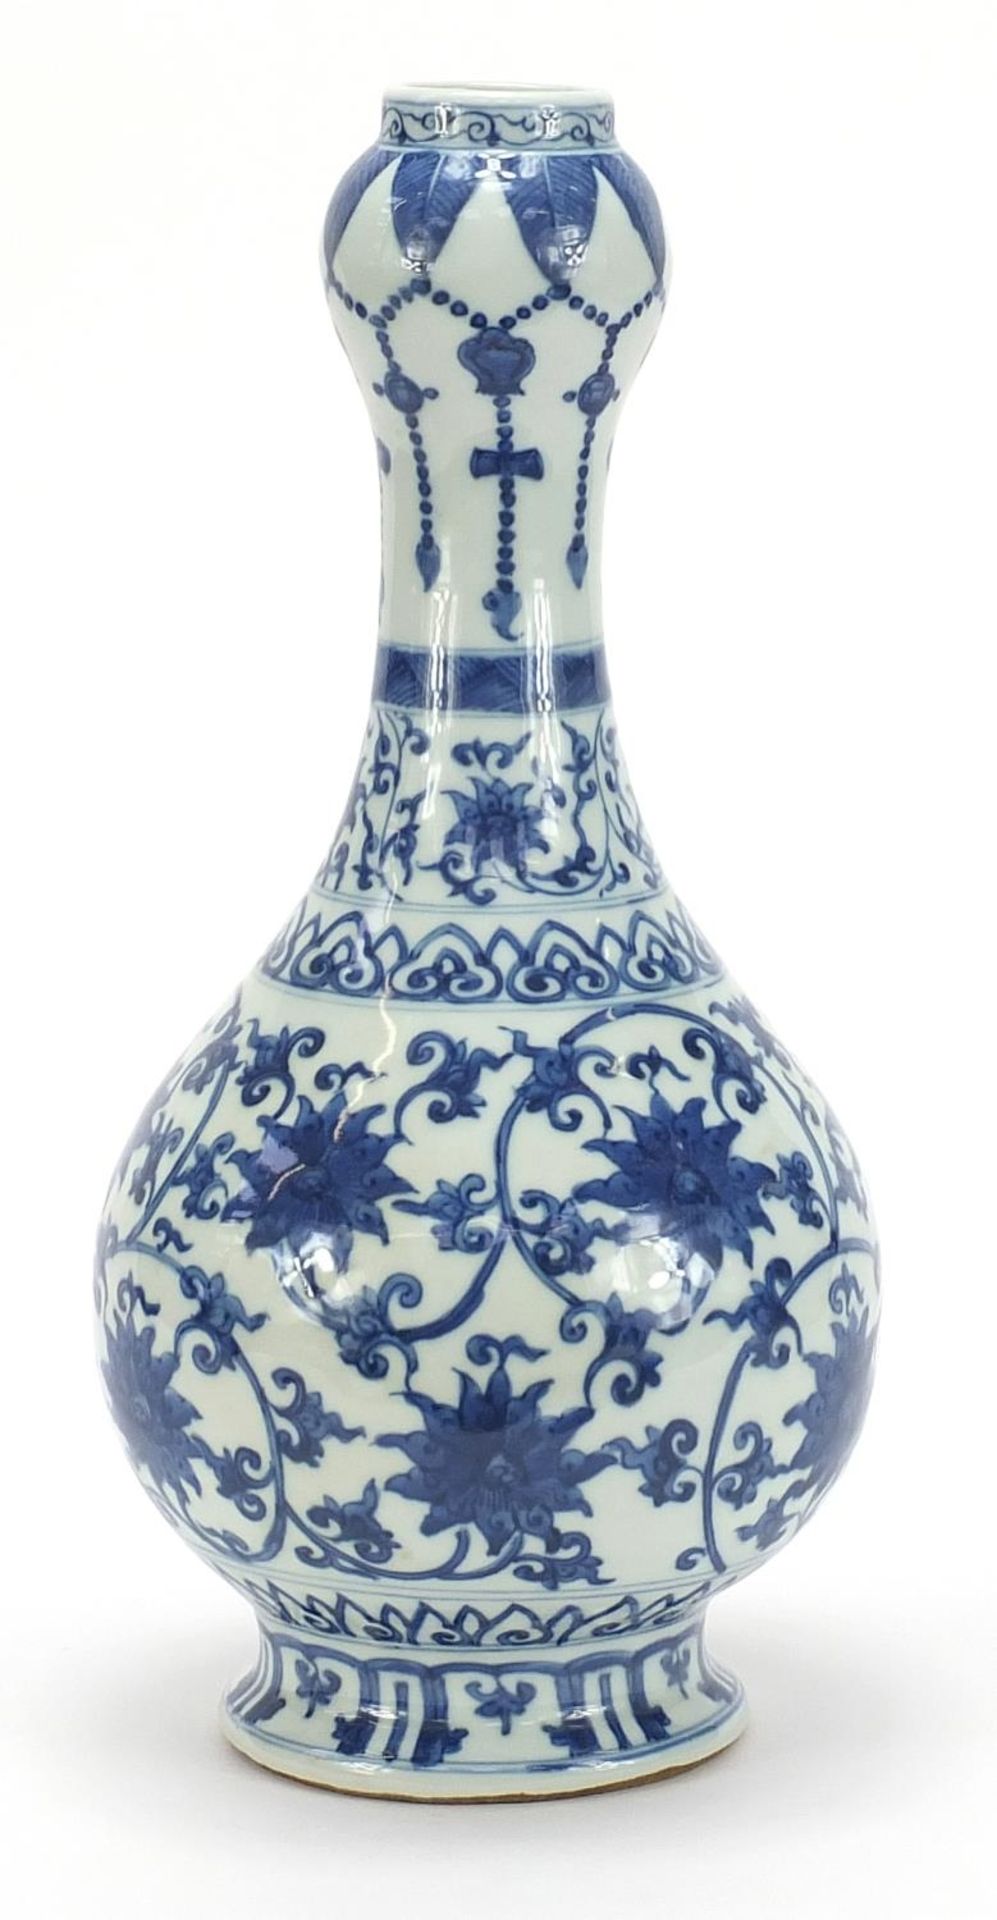 Chinese blue and white porcelain garlic head vase hand painted with flower heads amongst scrolling